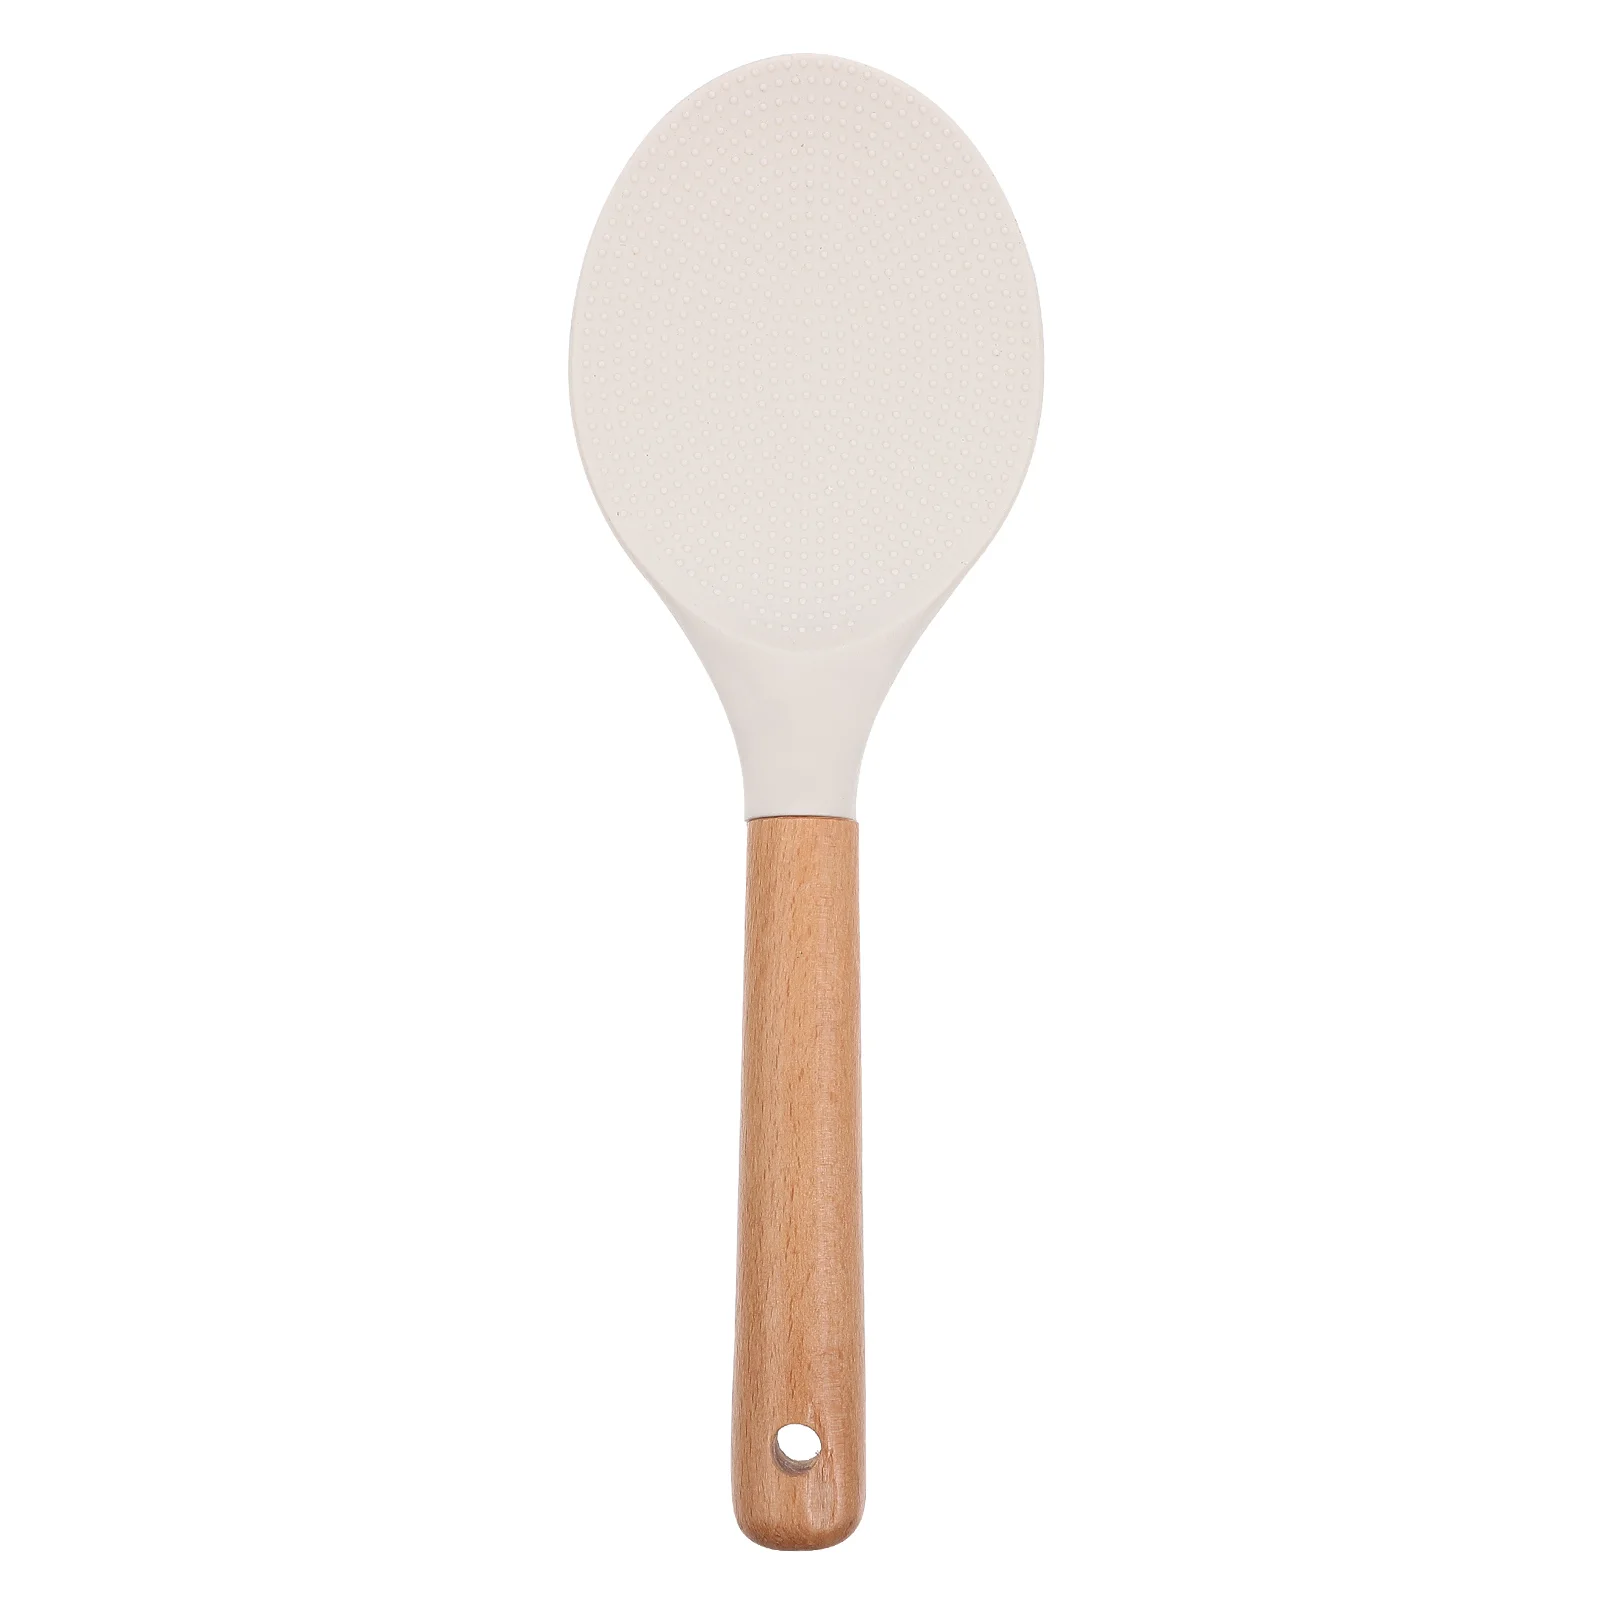 

Rice Paddle Spoon Silicone Spatula Serving Cooking Spoons Scooper Non Stick Utensils Sushi Chinese Scoop Asian Kitchen Paddles